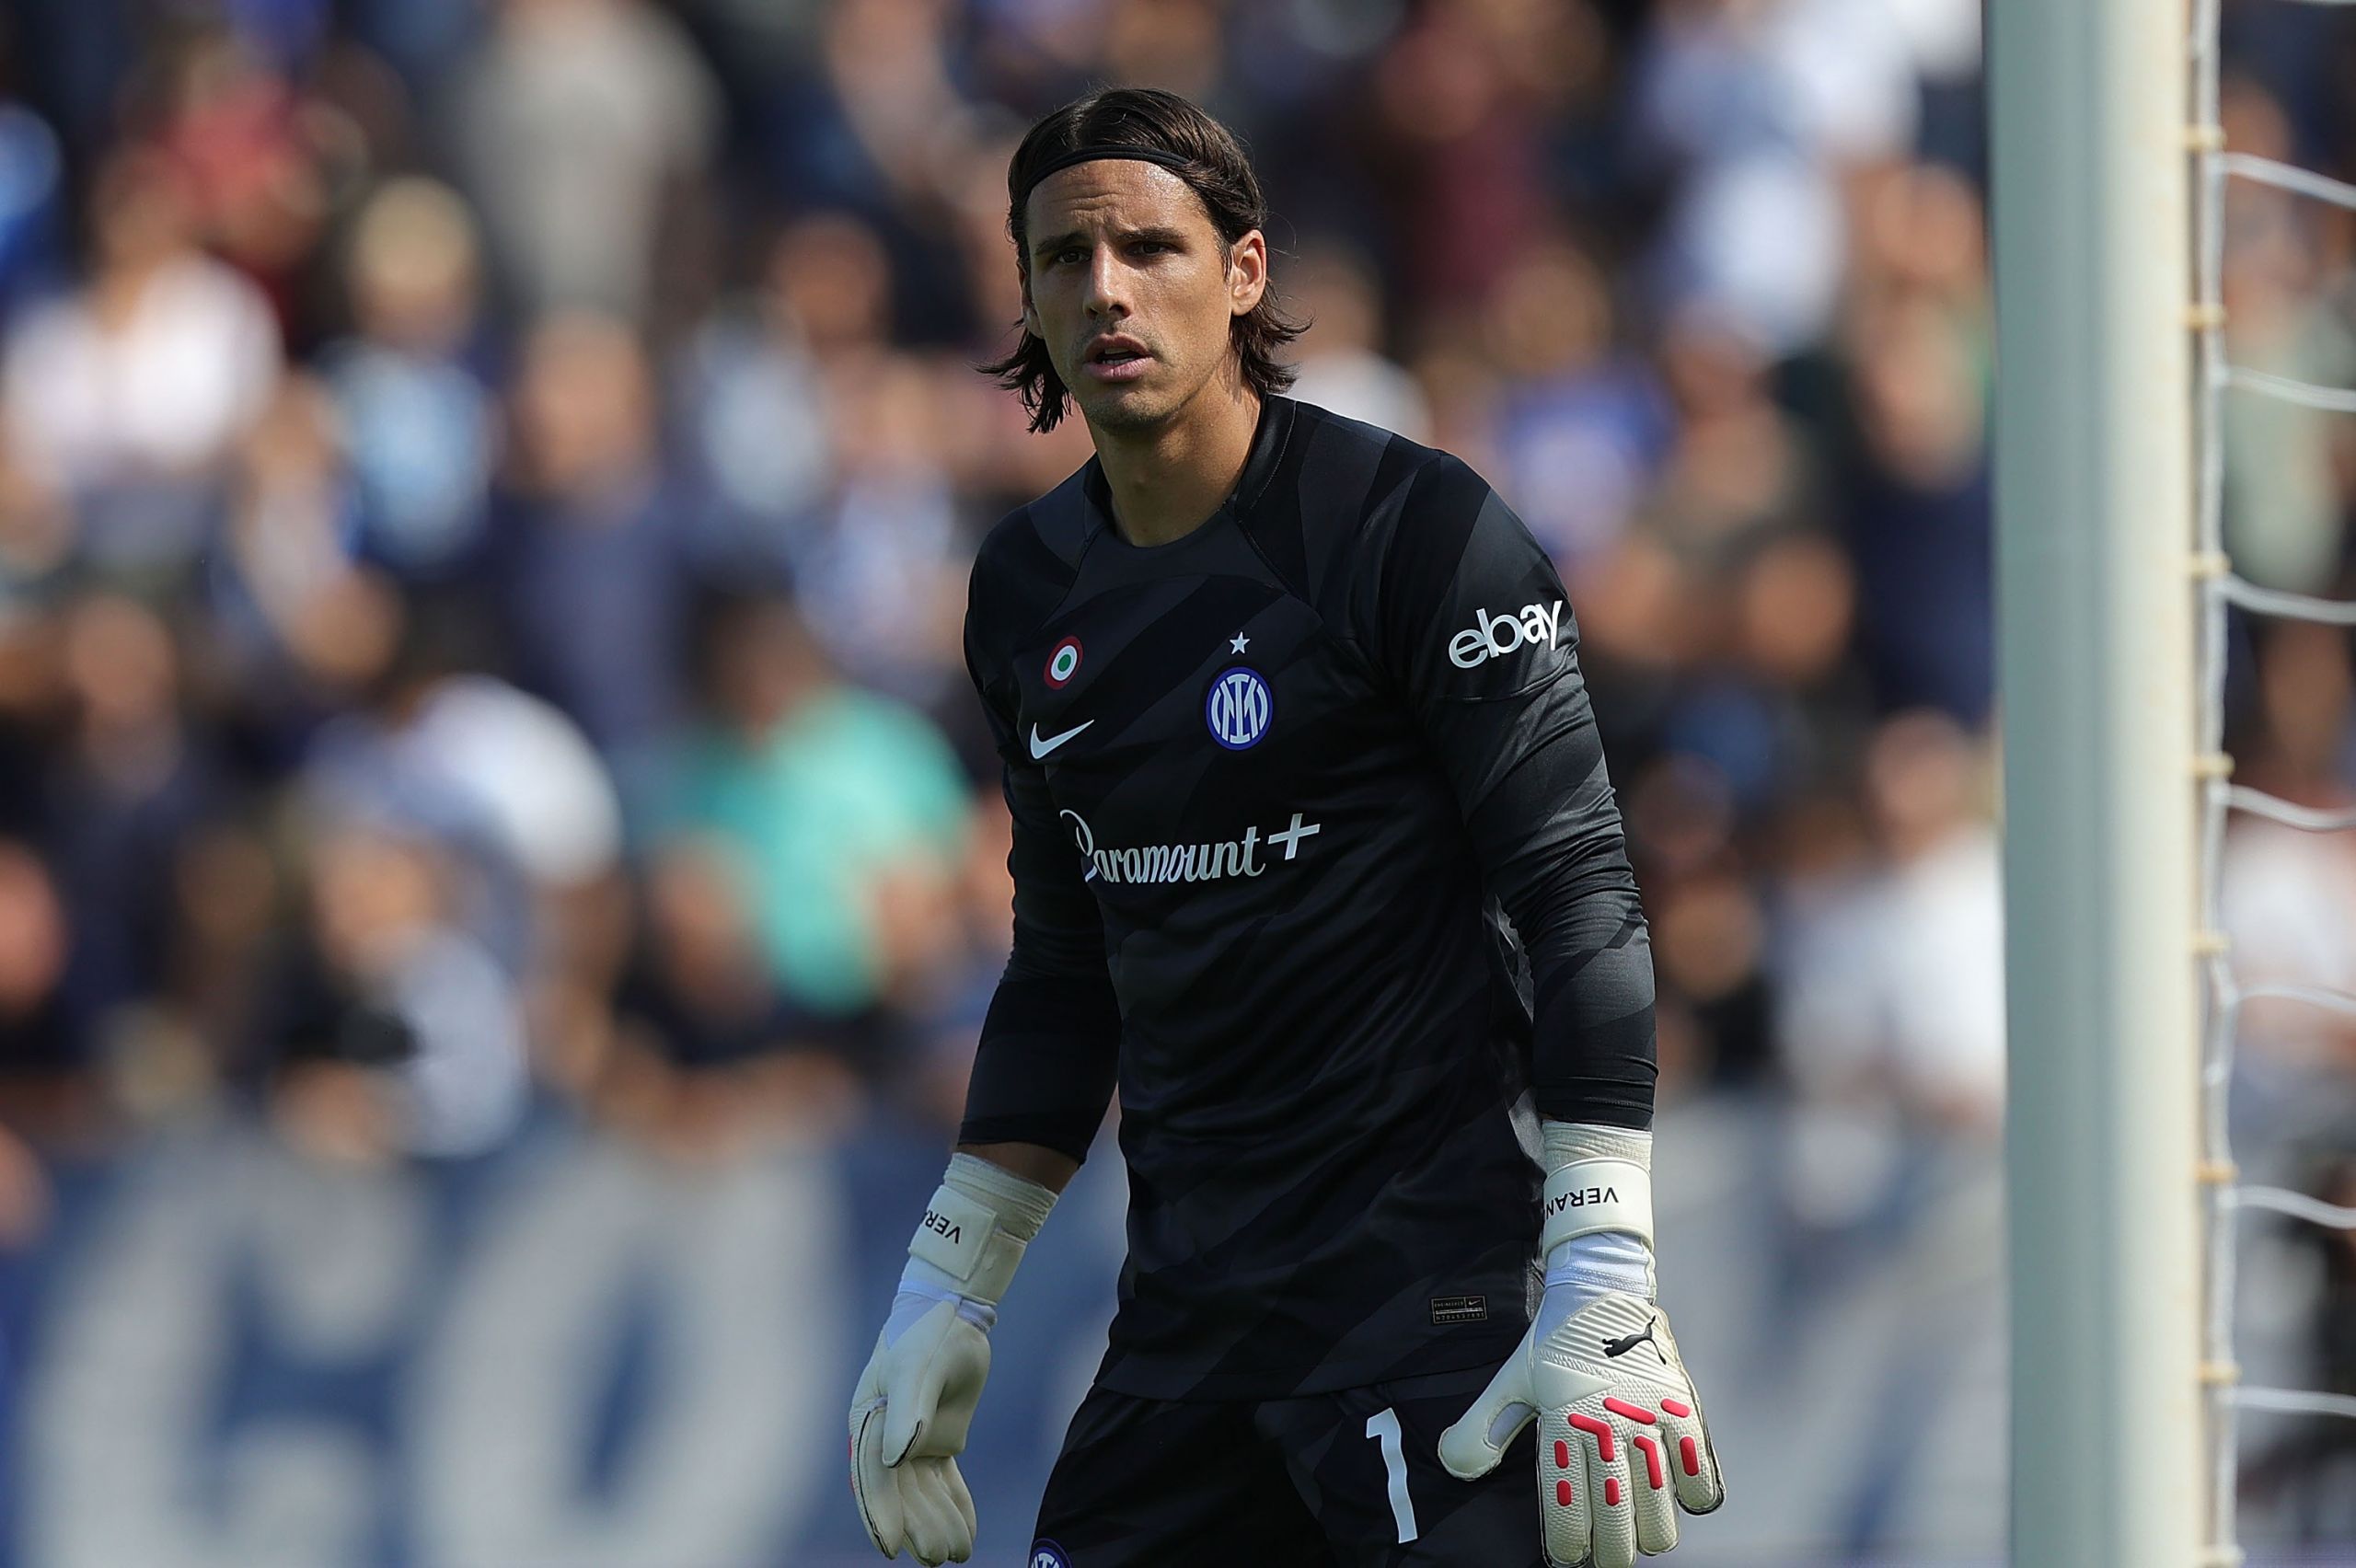 Yann Sommer sets new personal record in his first season at Inter Milan